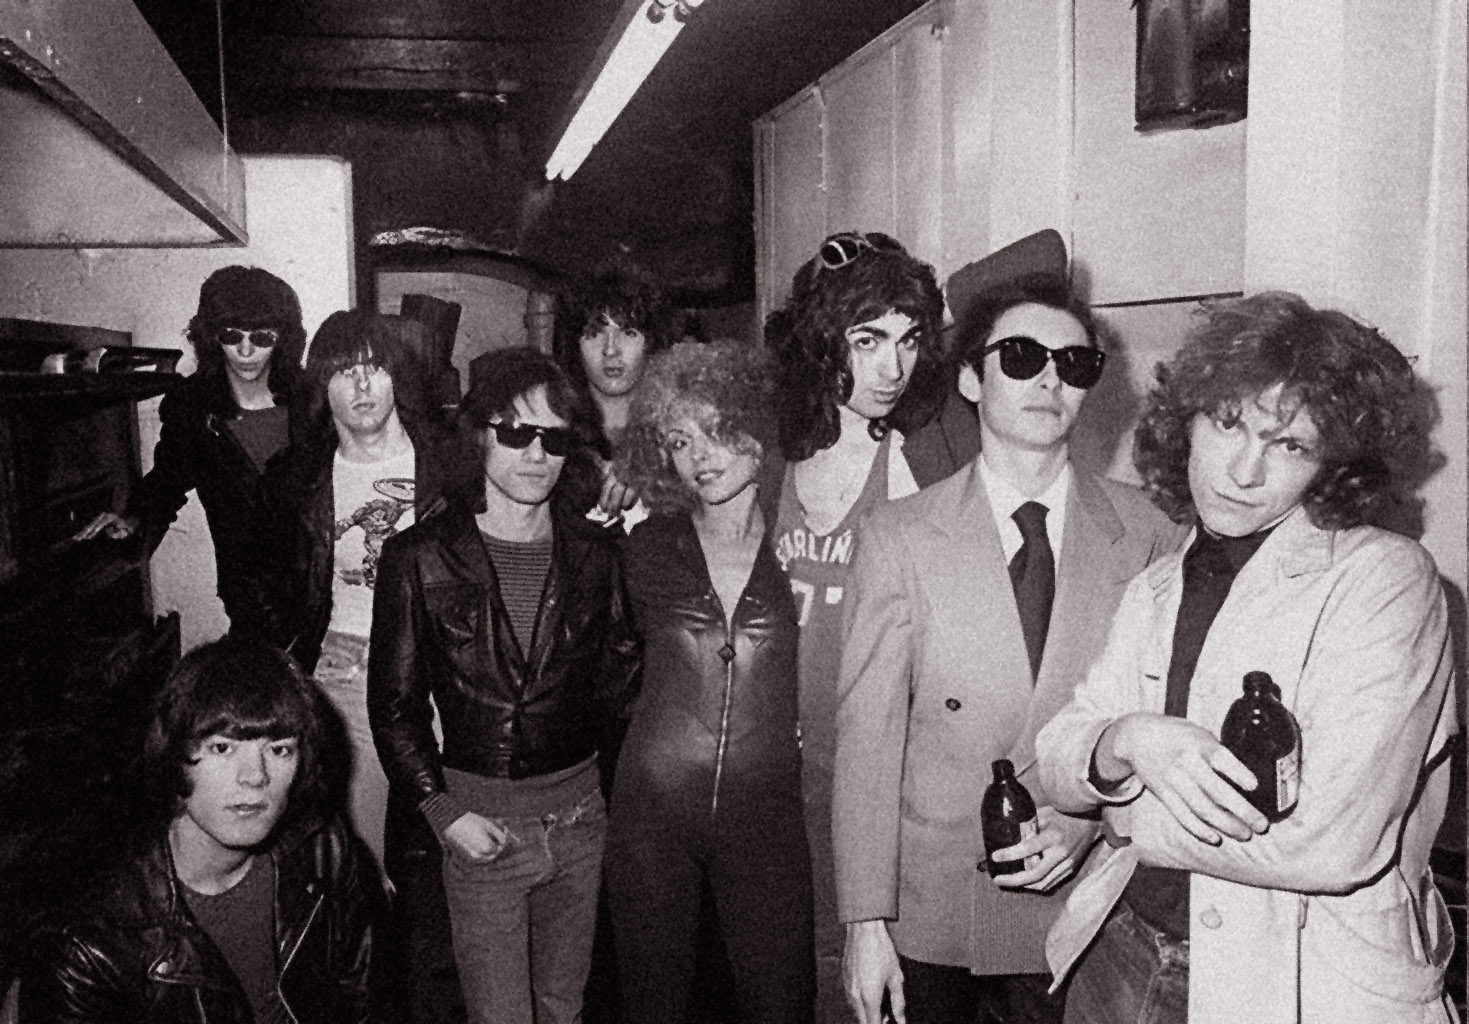 The Ramones and Blondie together at Mother's.